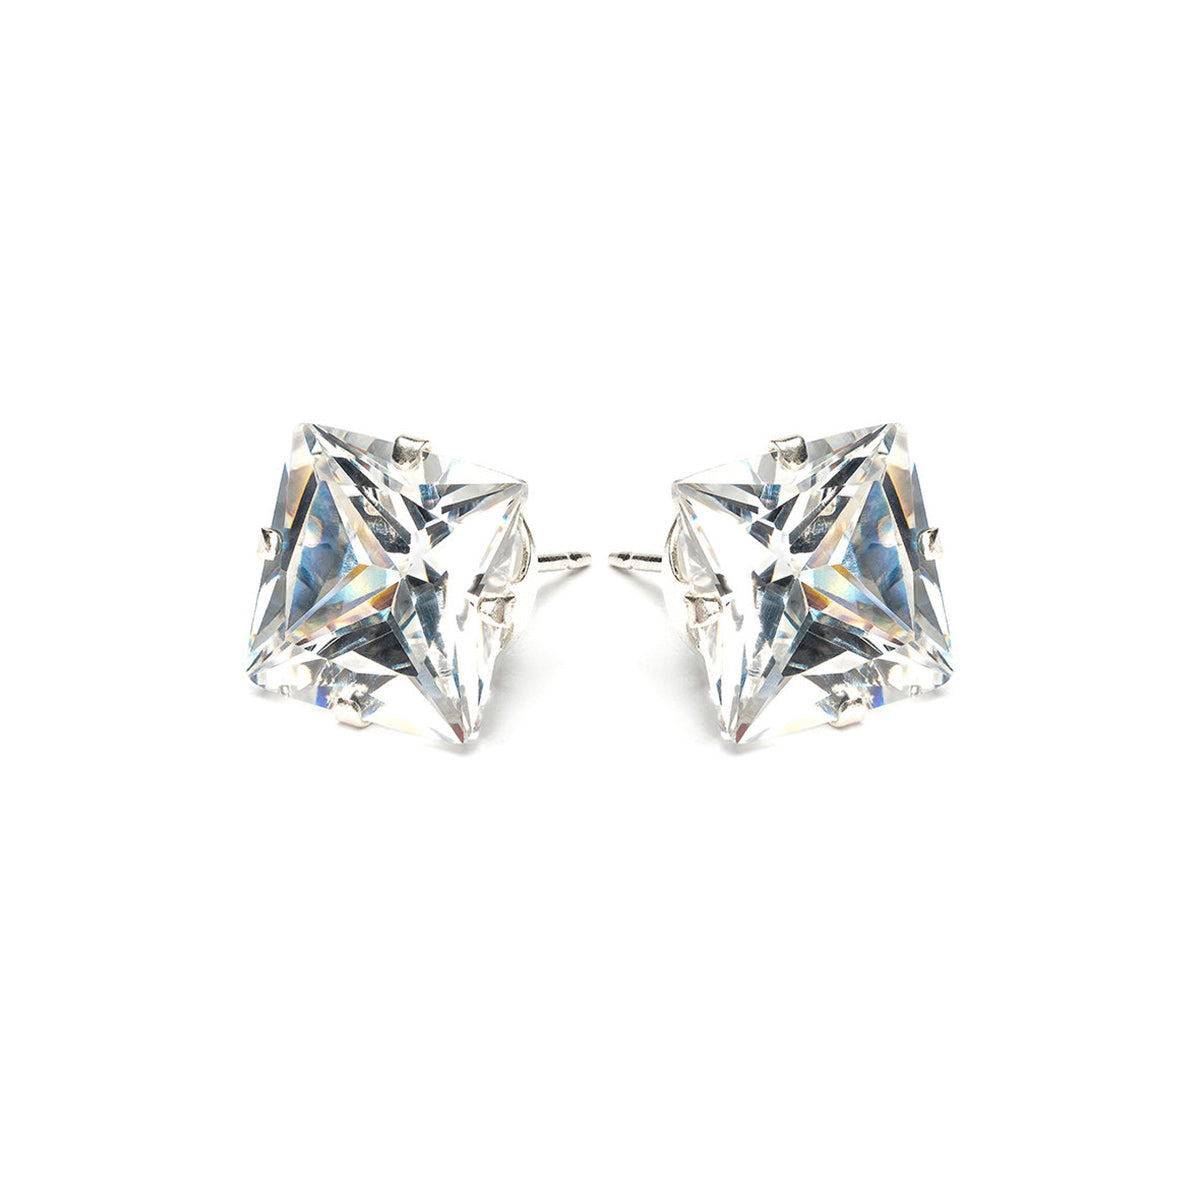 Sterling Silver 10 mm Square Cubic Zirconia Stud Earrings - Simply Whispers